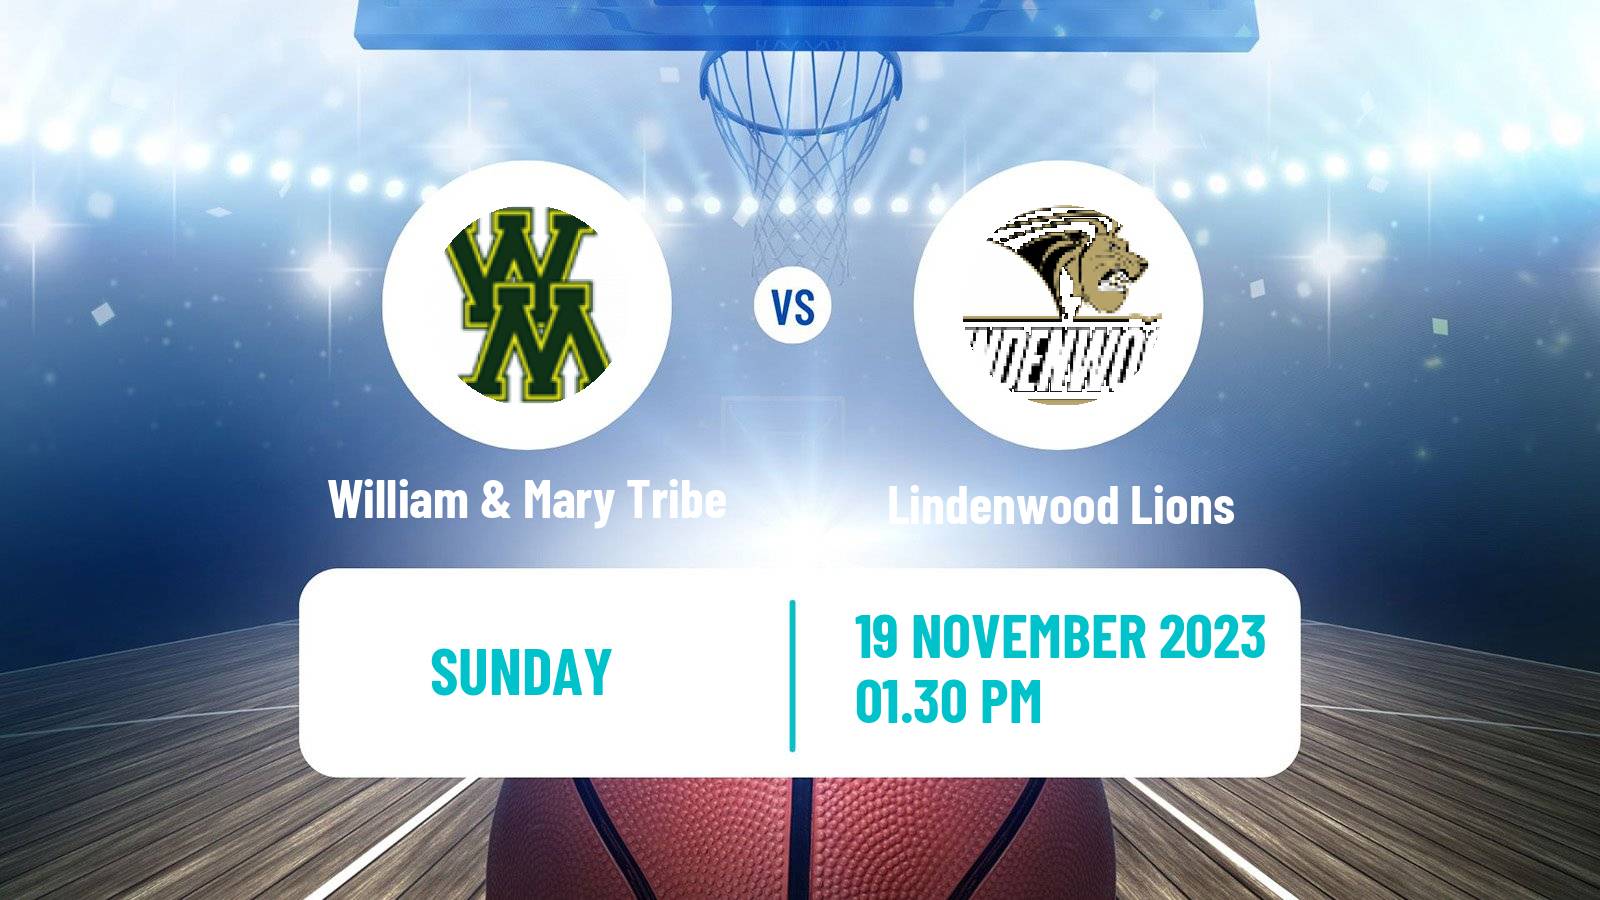 Basketball NCAA College Basketball William & Mary Tribe - Lindenwood Lions